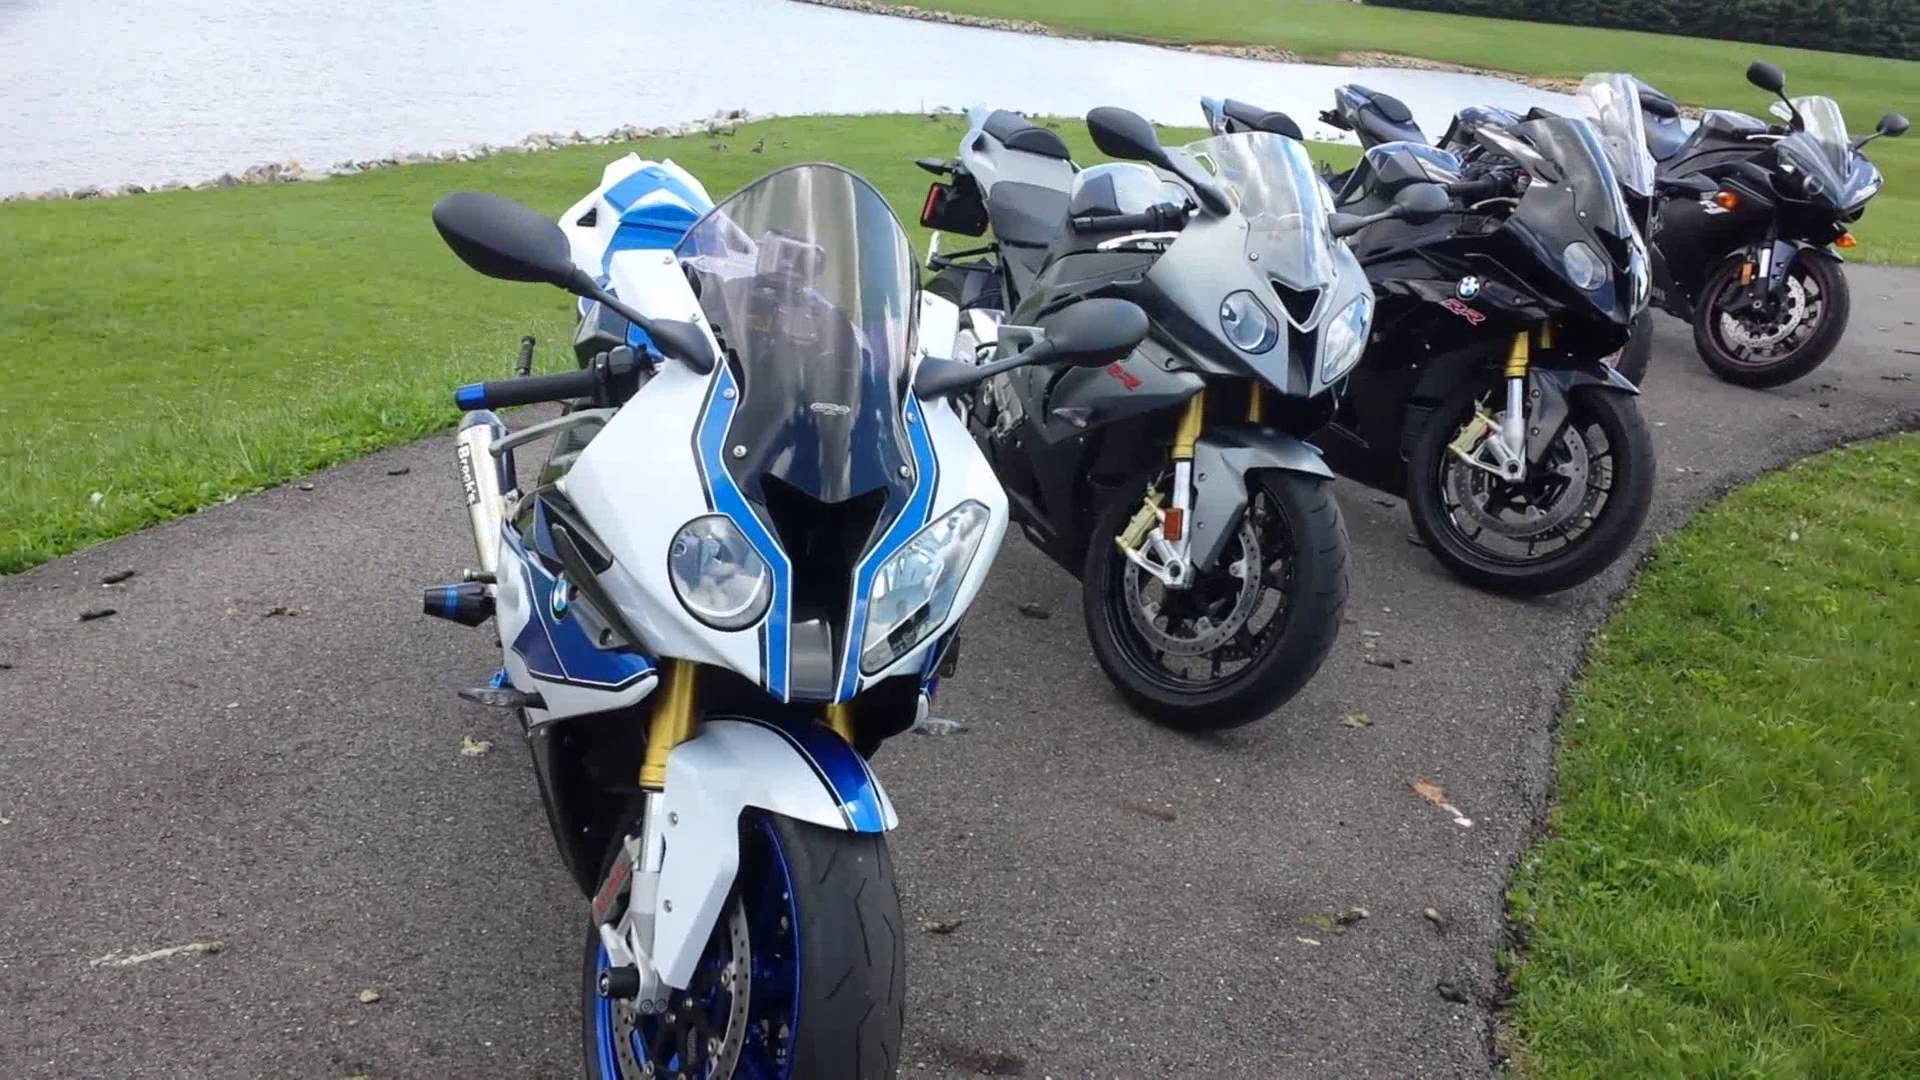 BMW HP S1000RR, zx10r, R1: on a country ride